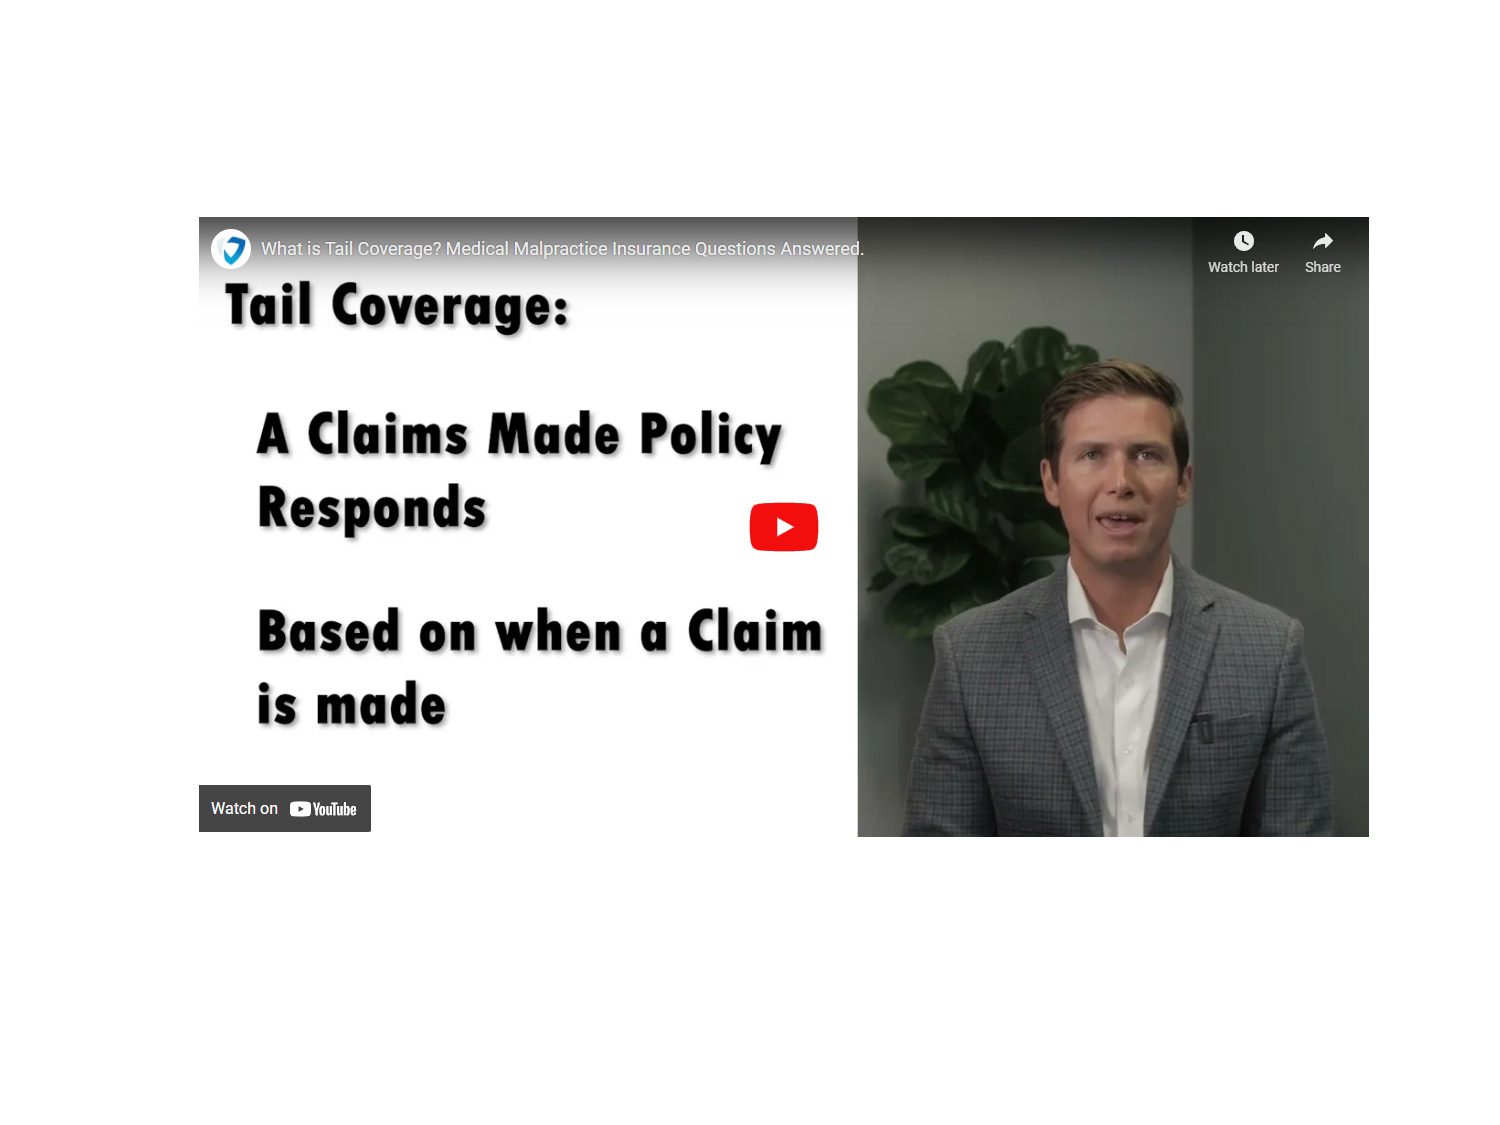 Max Schloemann Answers Your Medical Malpractice Insurance Questions In This Video